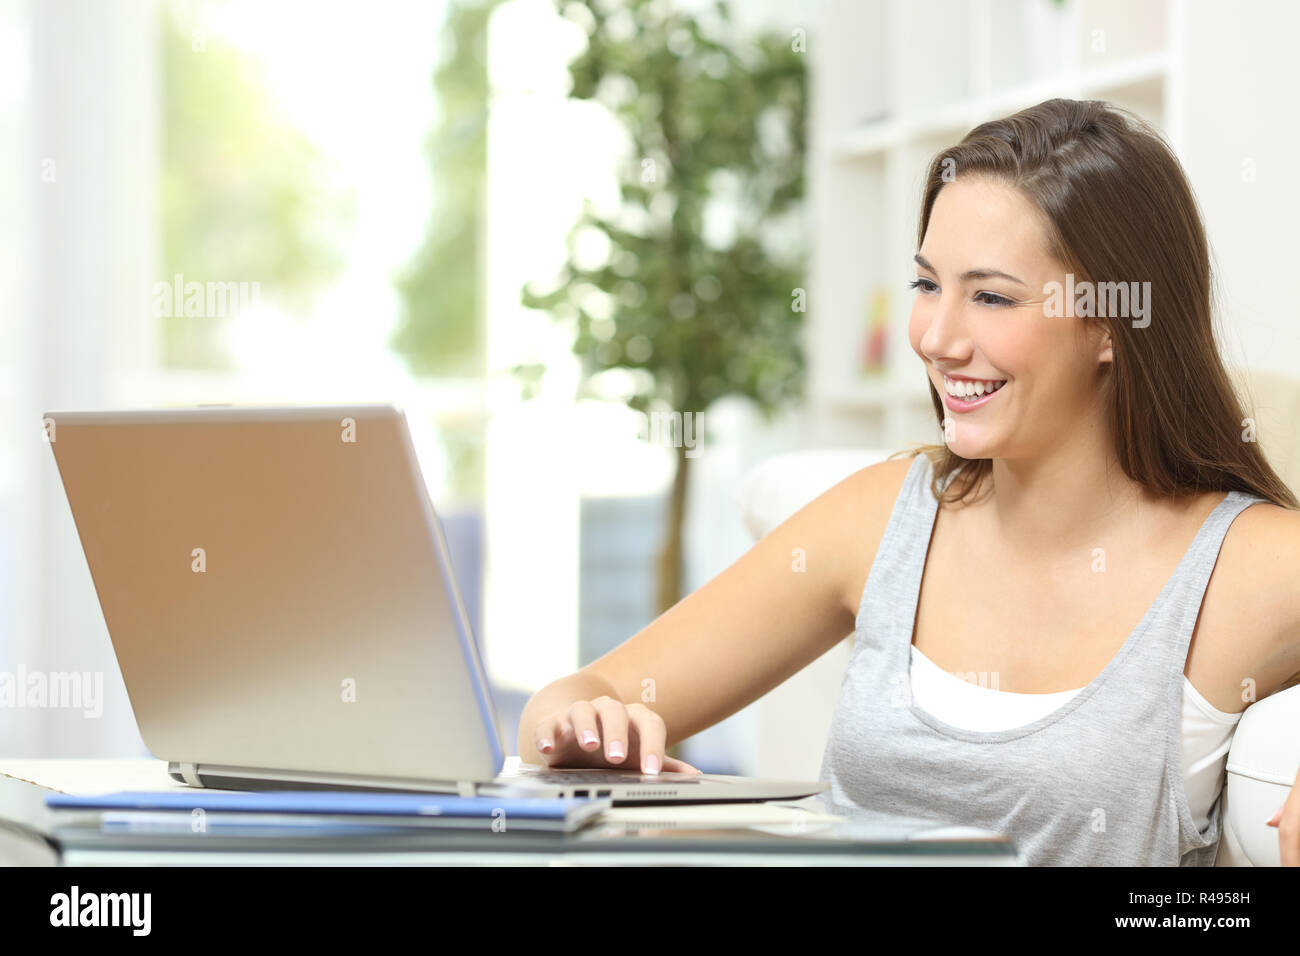 Casual woman using a laptop at home Stock Photo